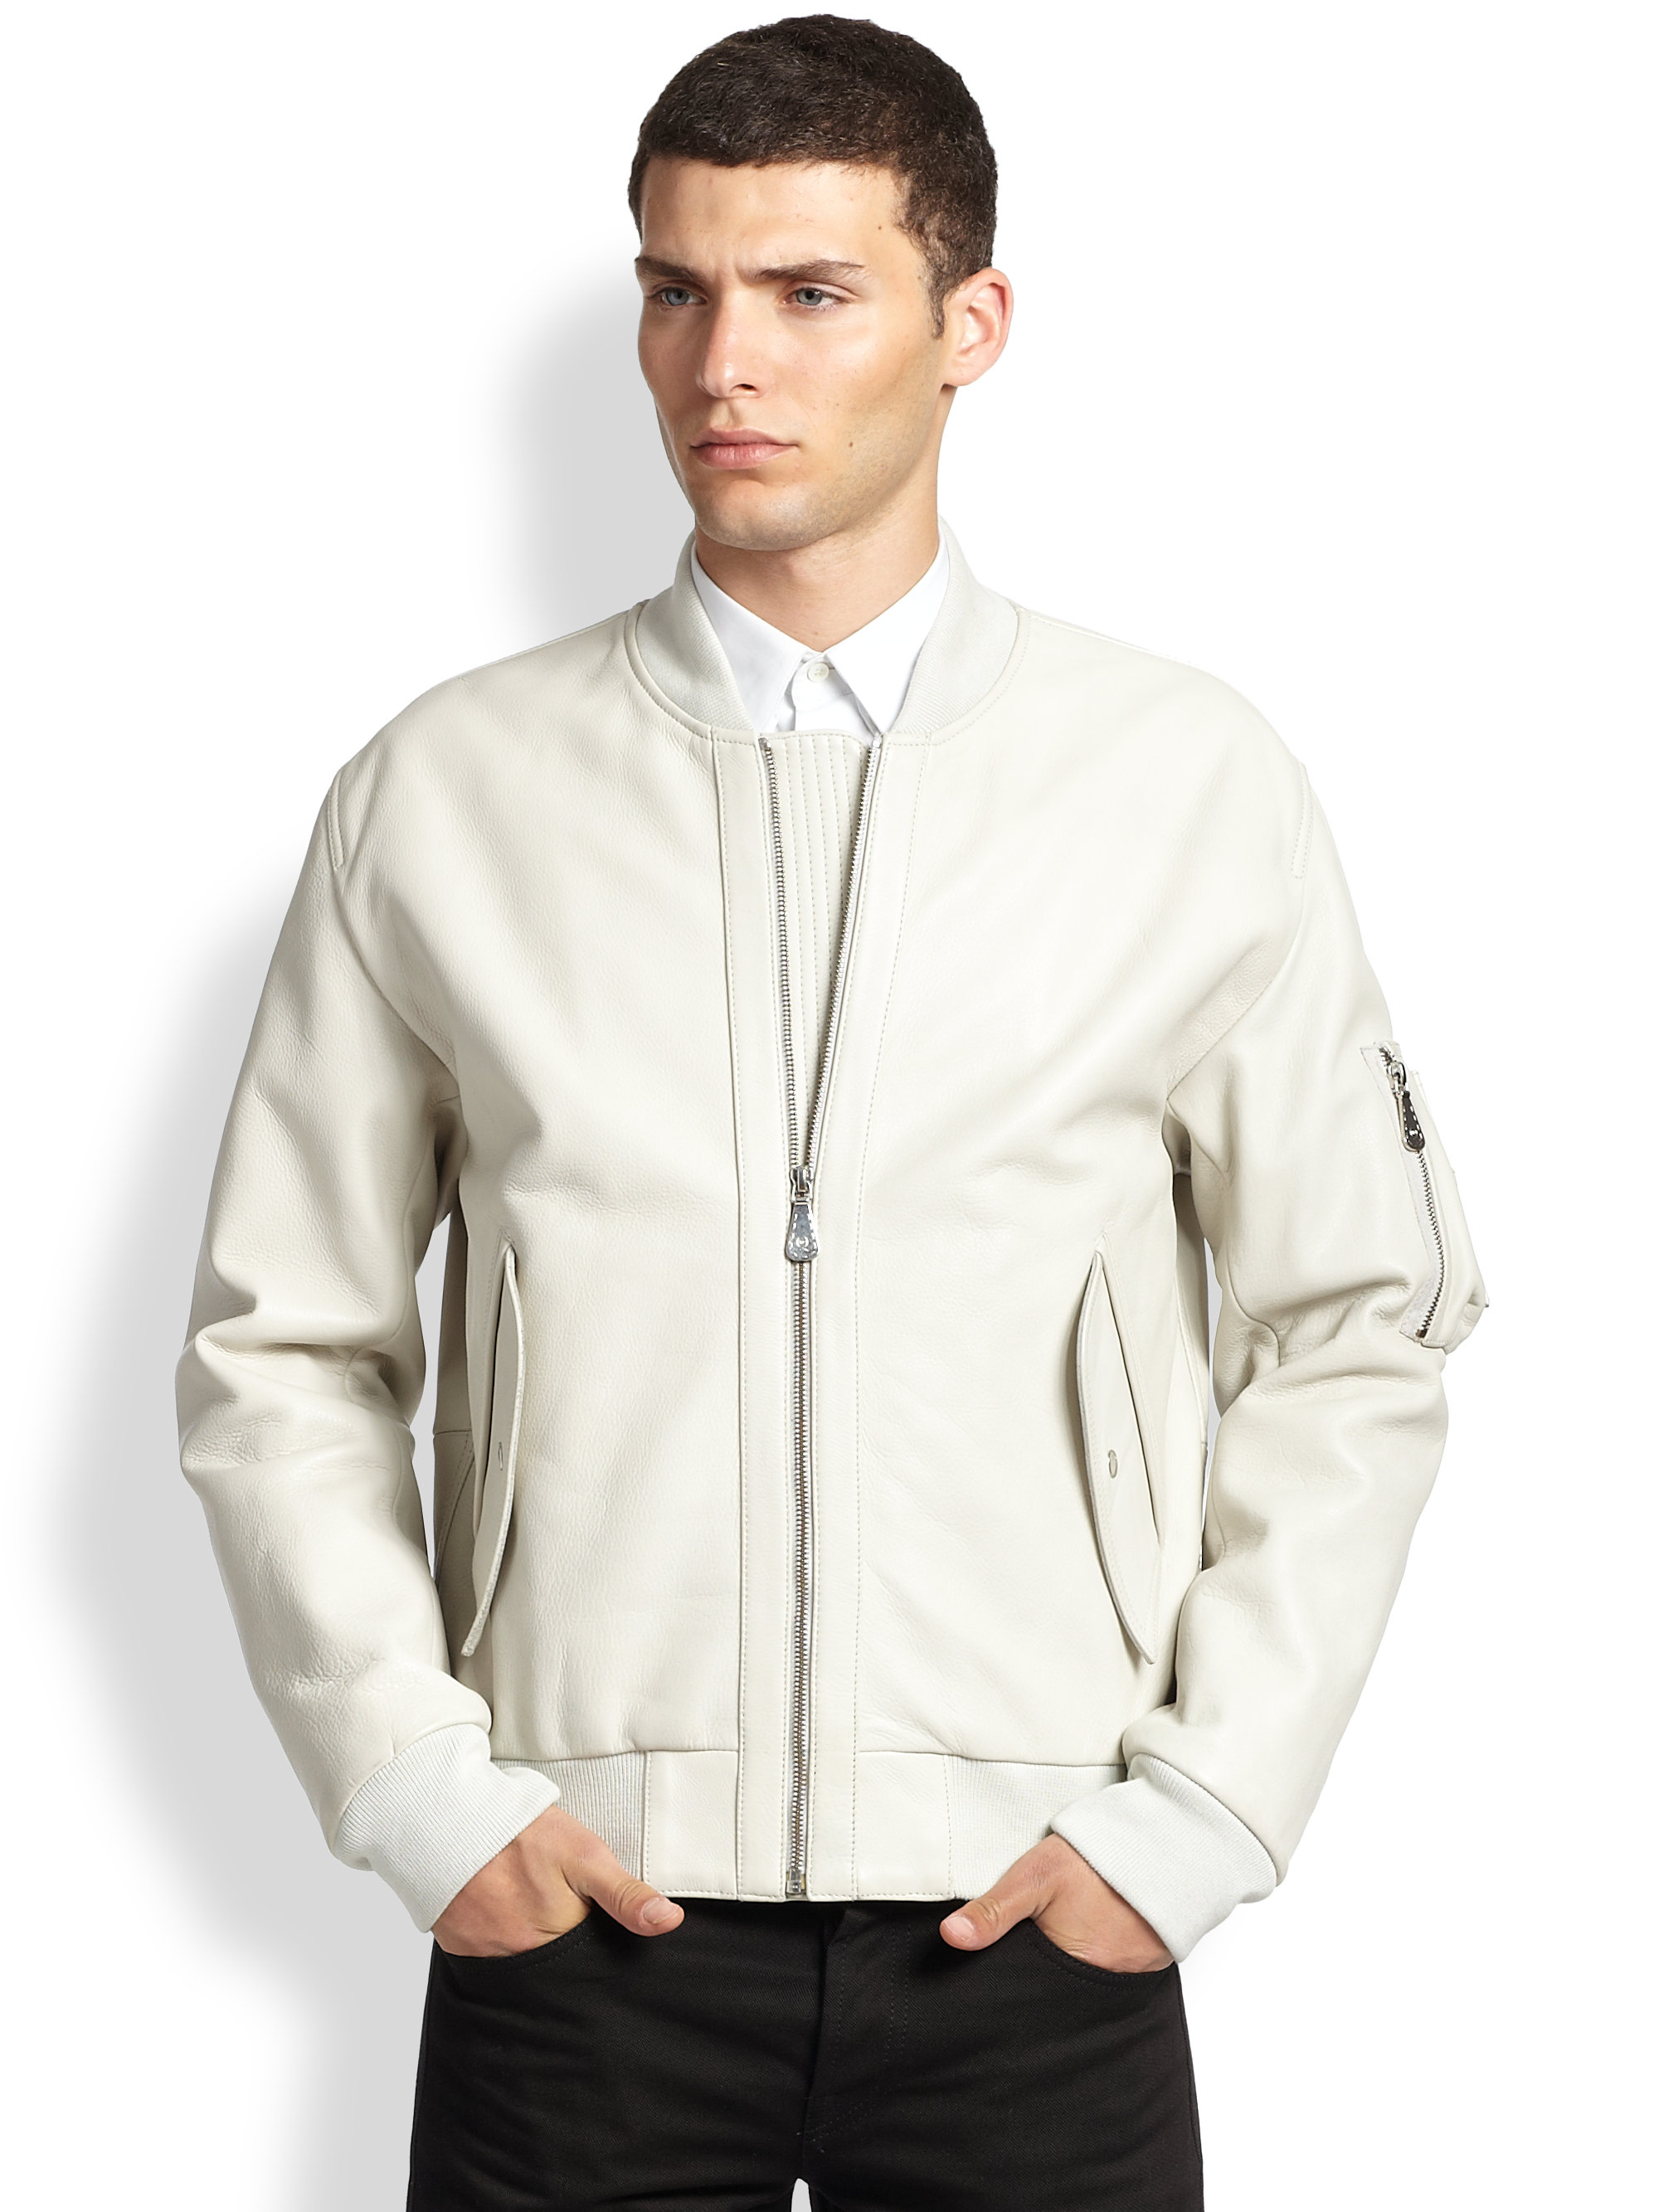 McQ Leather Bomber Jacket in White for Men - Lyst